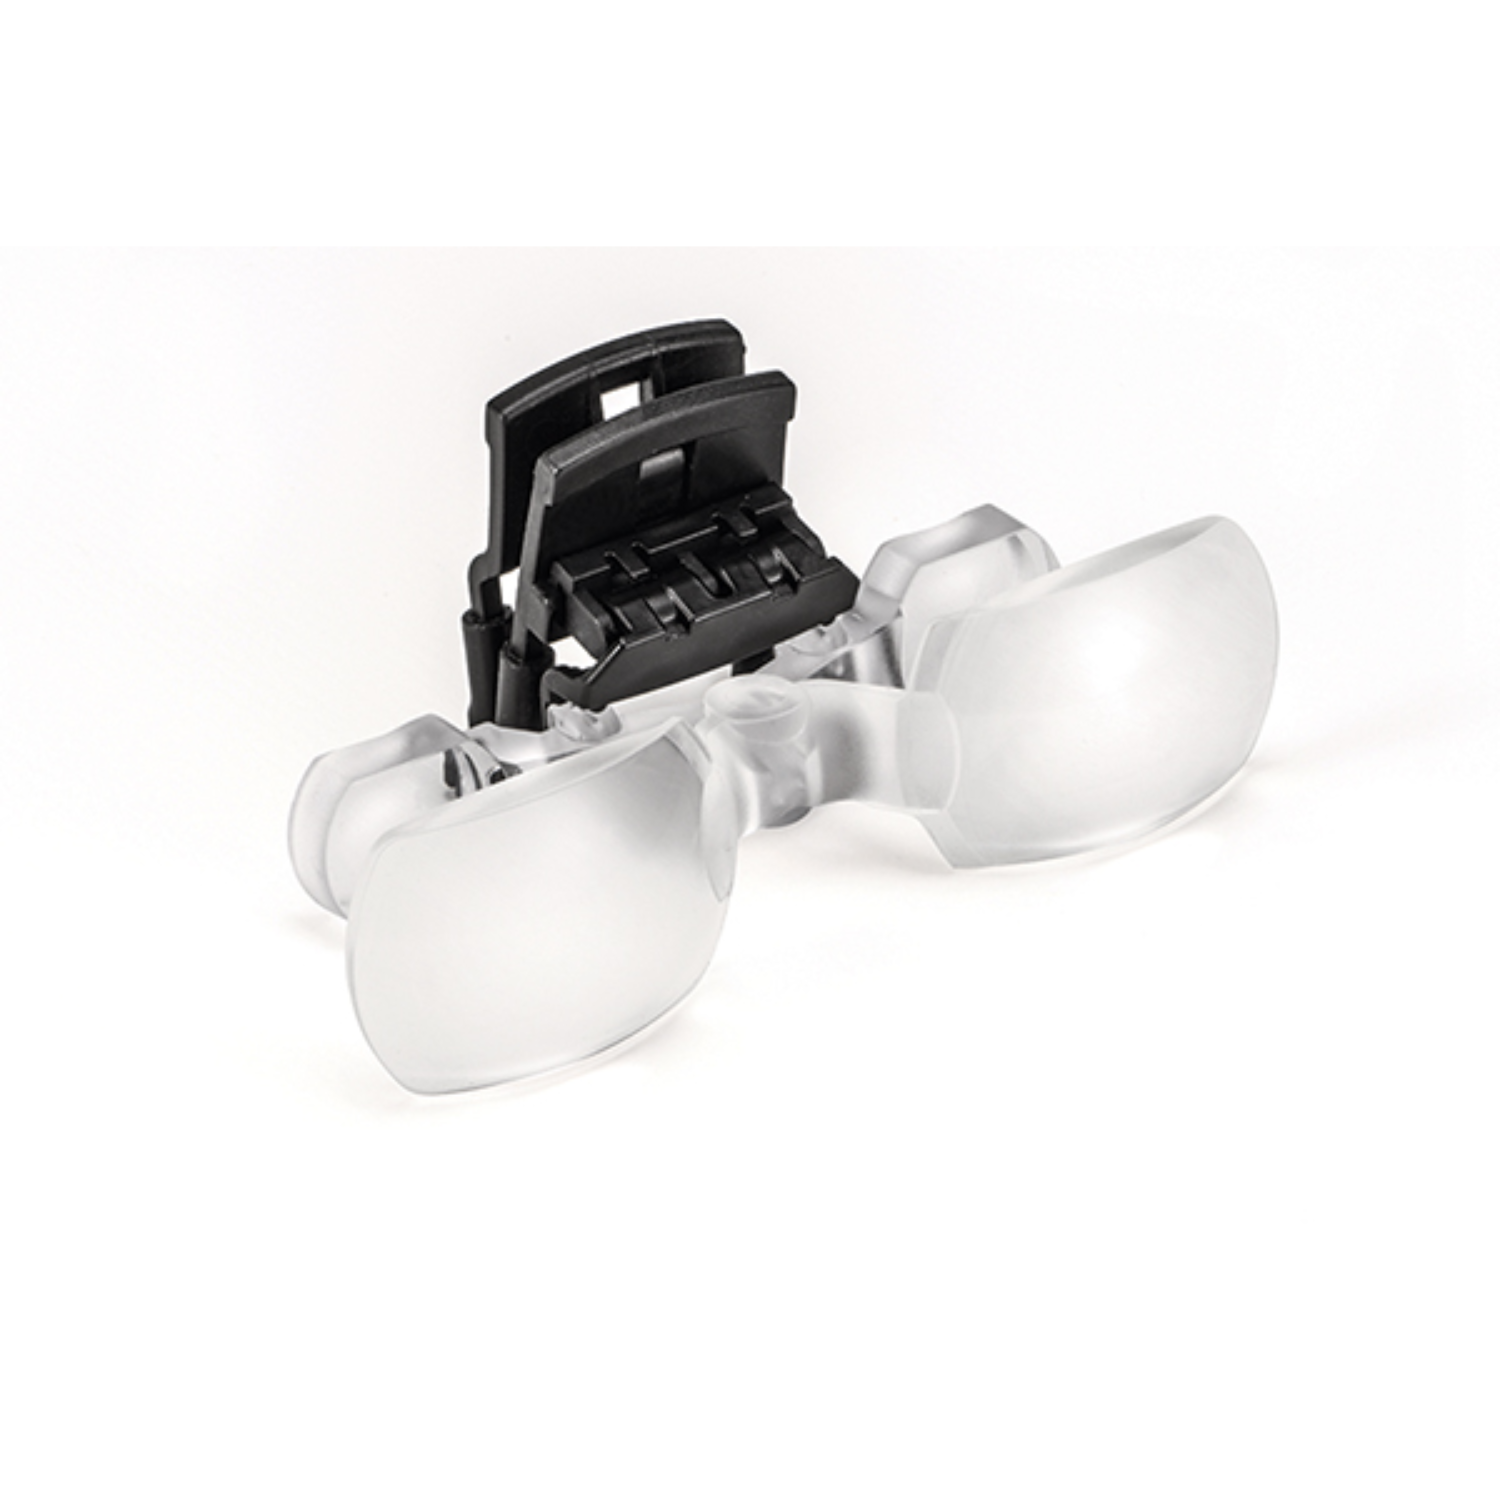 Image of the MaxTV Clip-on distance magnifier from Eschenbach.